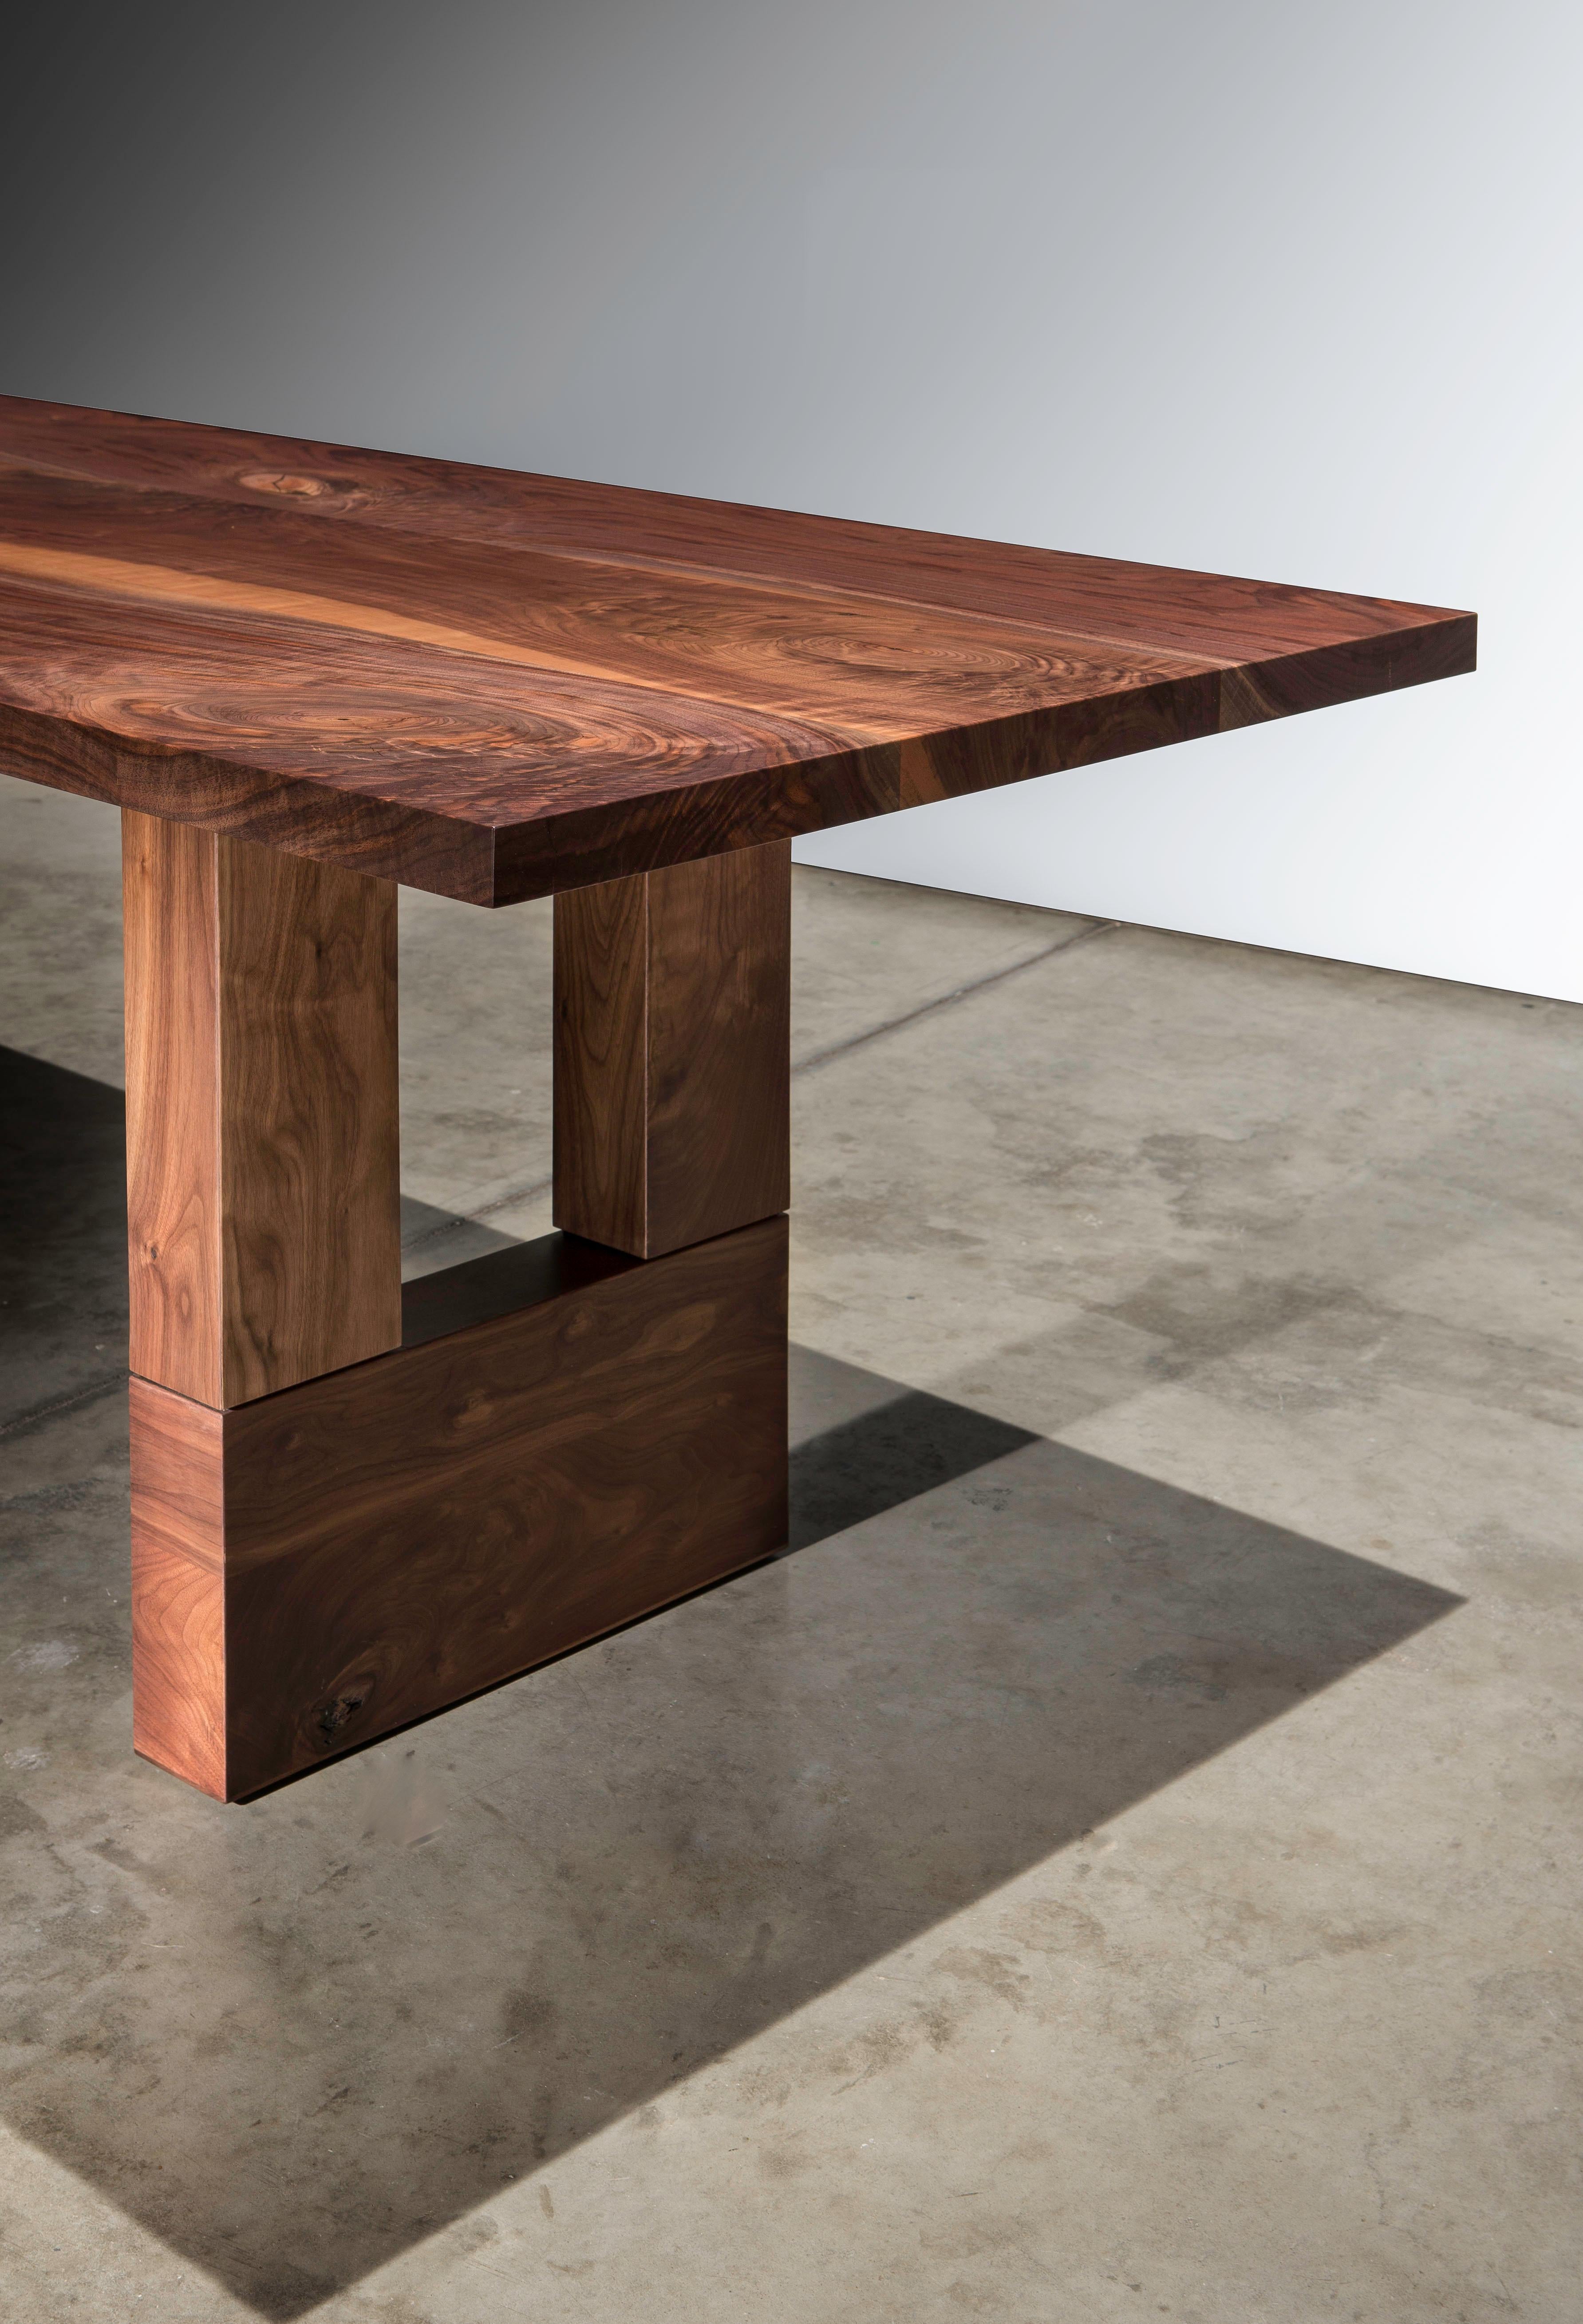 The McNichols dining table is made of a solid walnut board top that has been hand-selected to show off the natural beauty and character of the black walnut. The tabletop is set on solid walnut legs. The legs are made to keep the table structurally